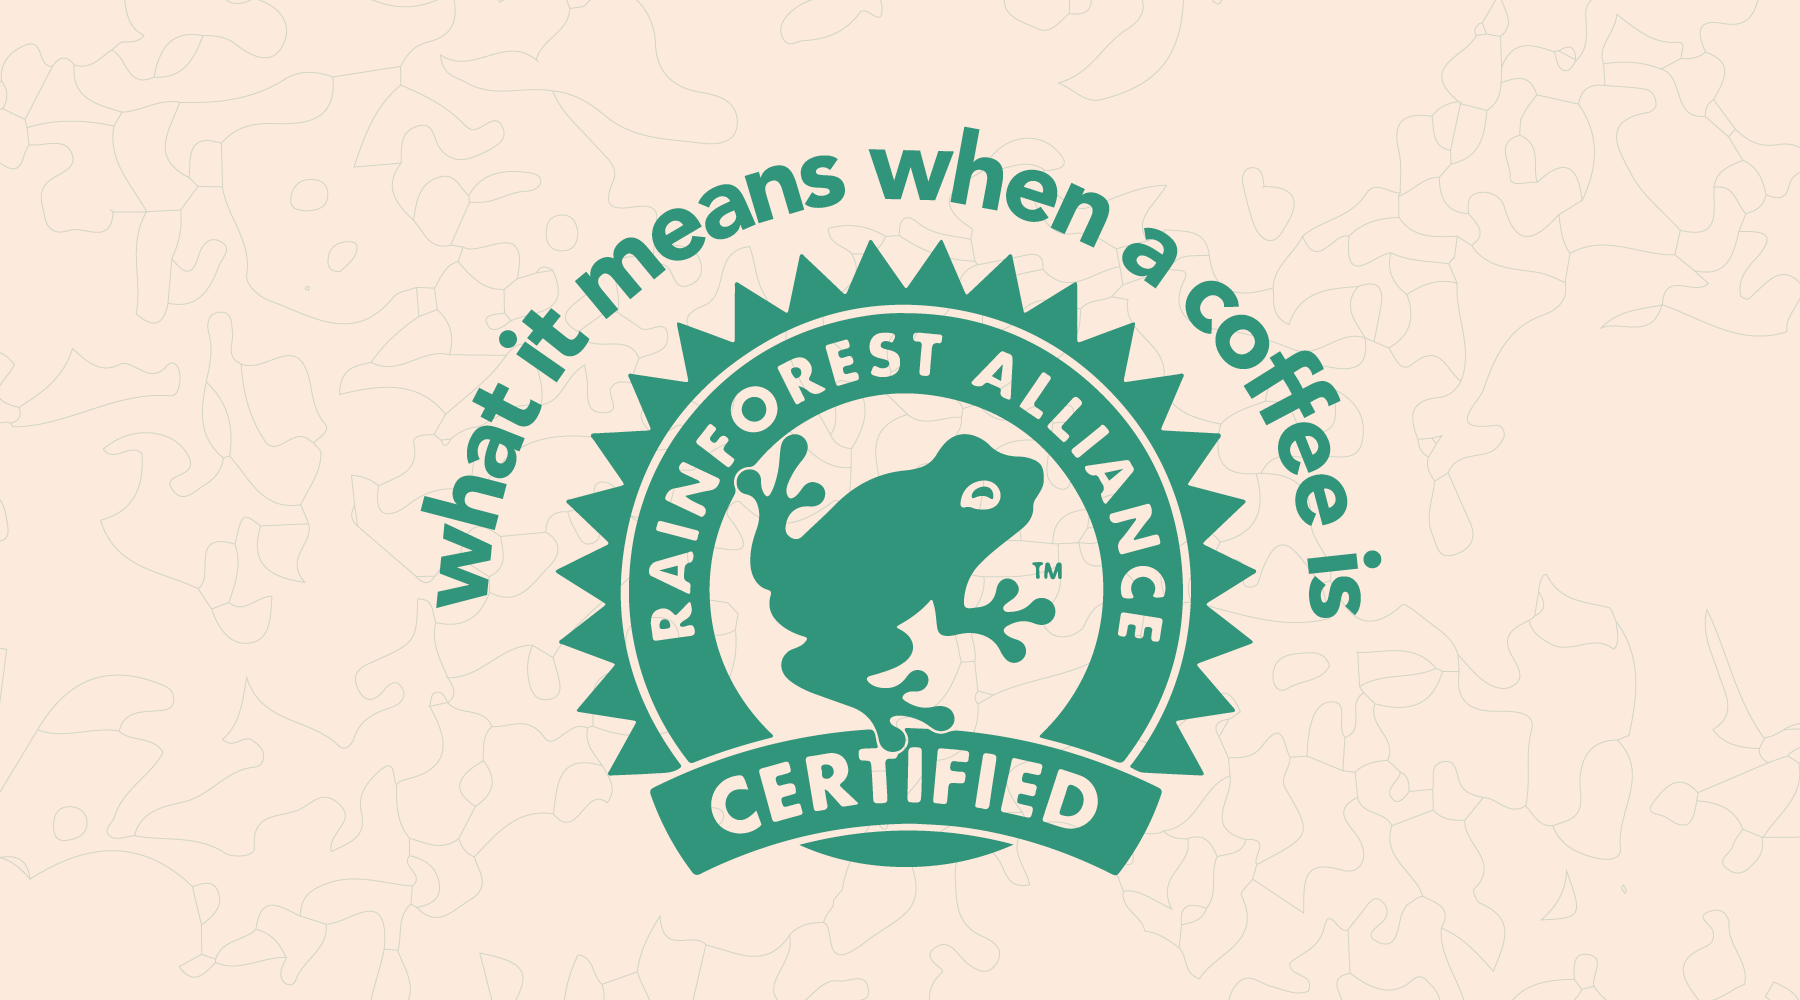 What it Means When Coffee is "Rainforest Alliance" Certified